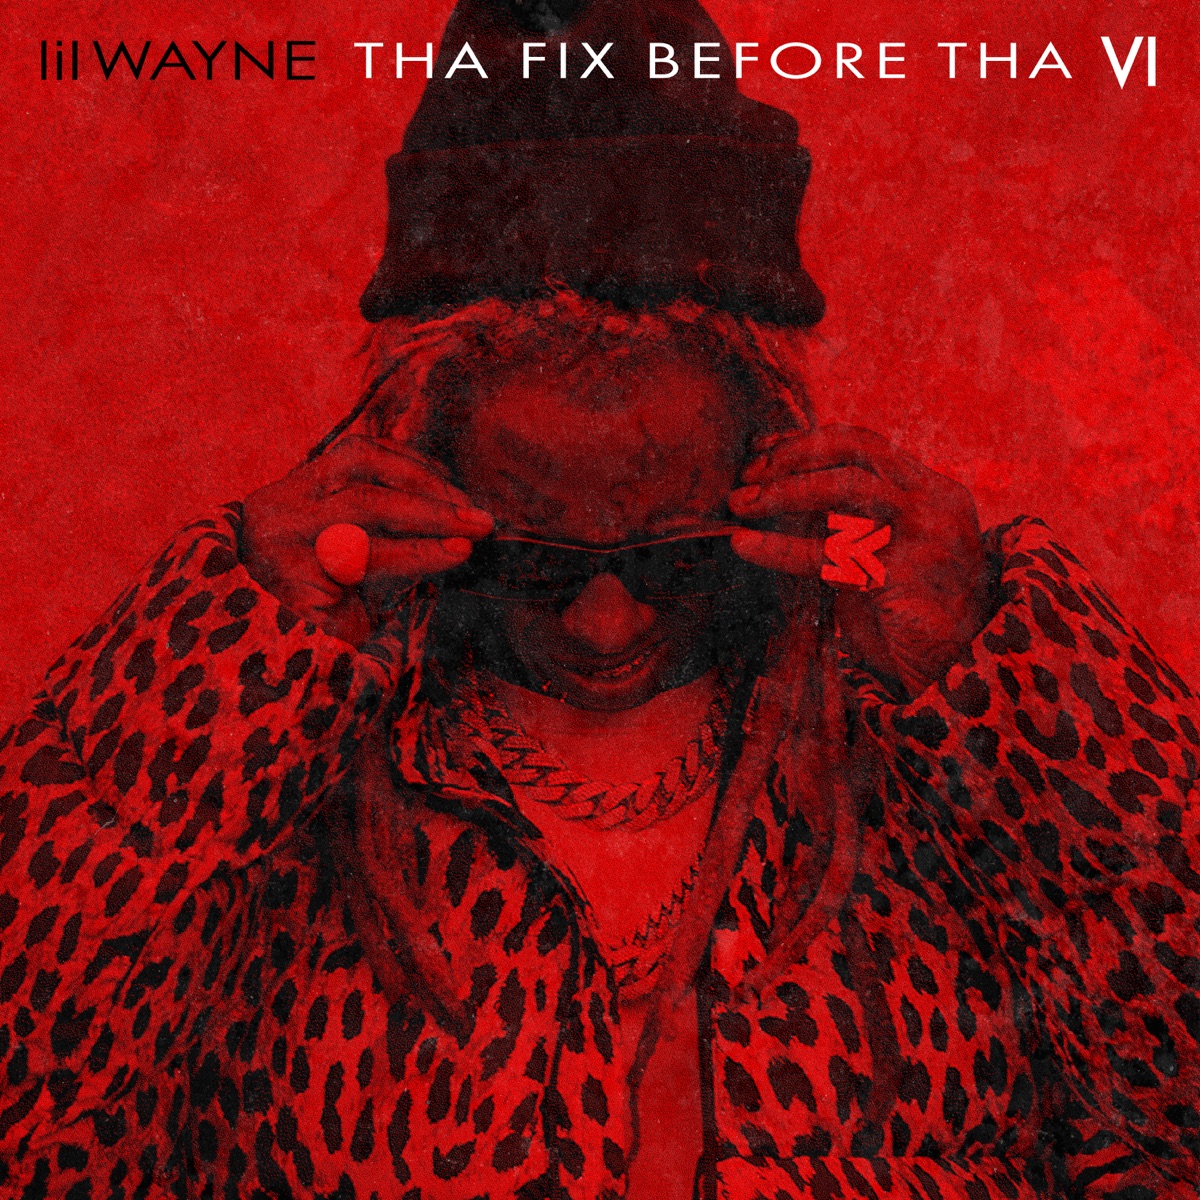 Lil Wayne released his new mixtape on Sept. 29, disappointing fans everywhere.